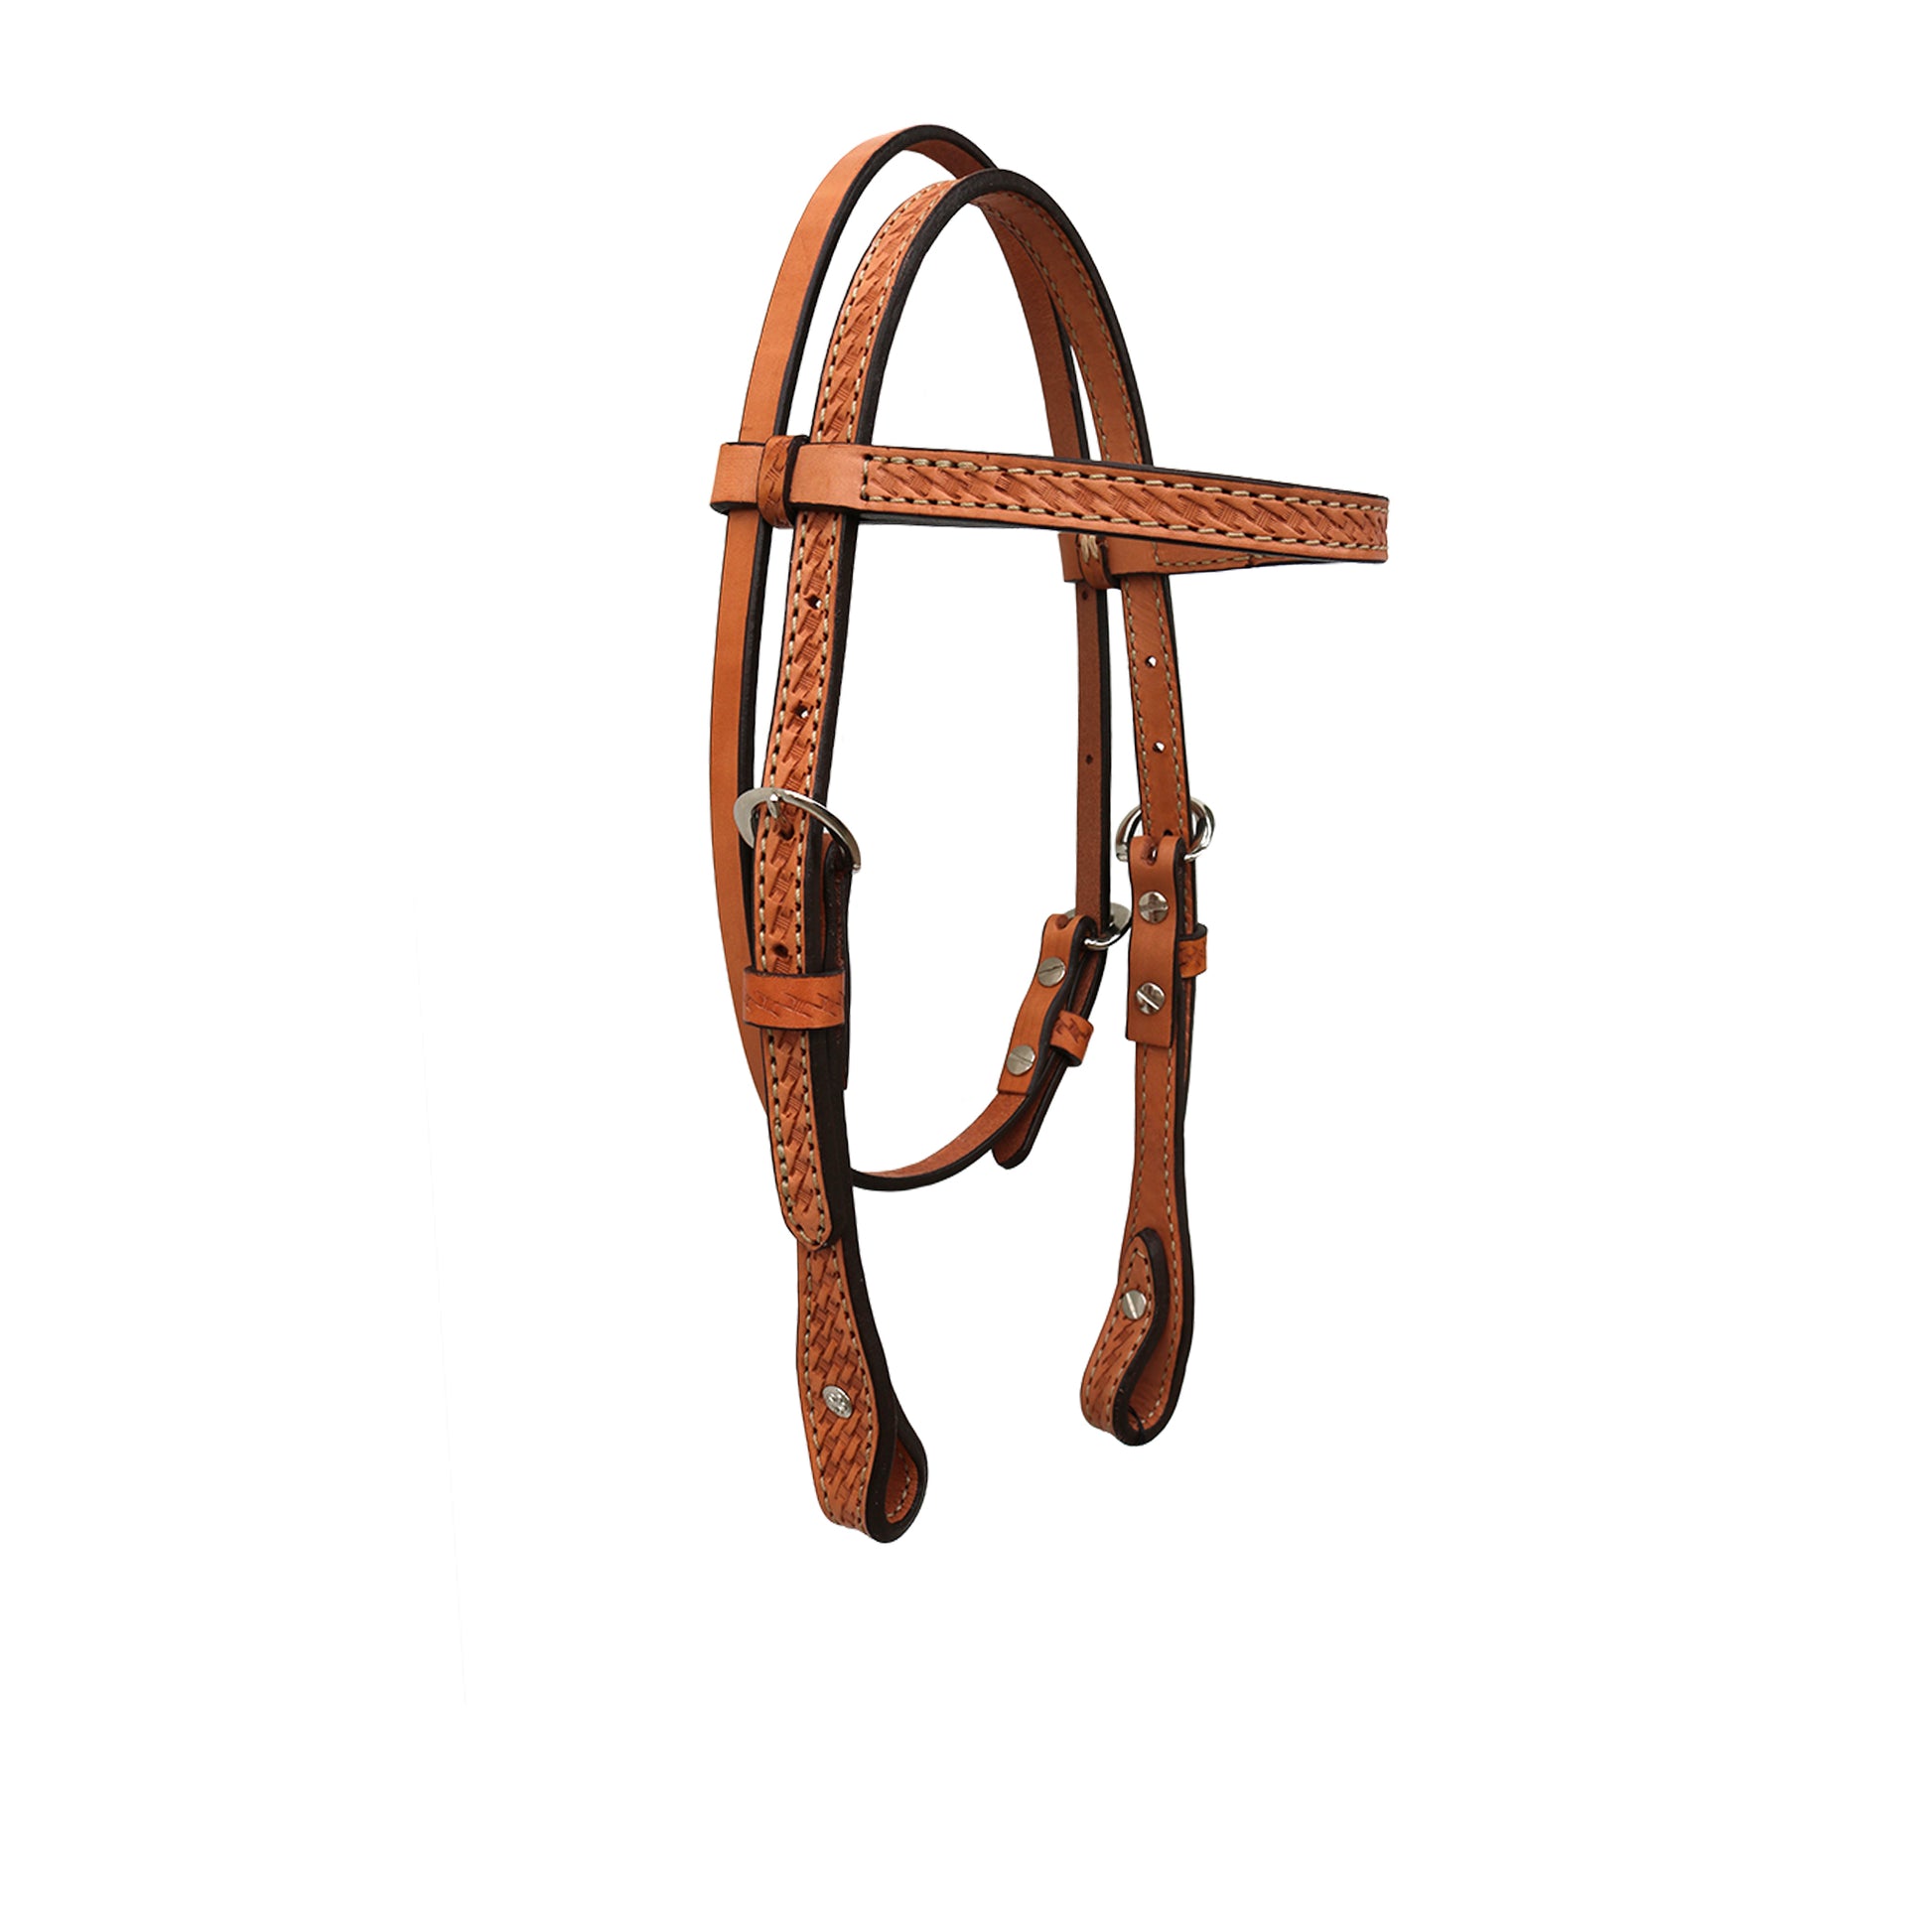 1/2" Pony straight browband headstall golden leather basket tooled.